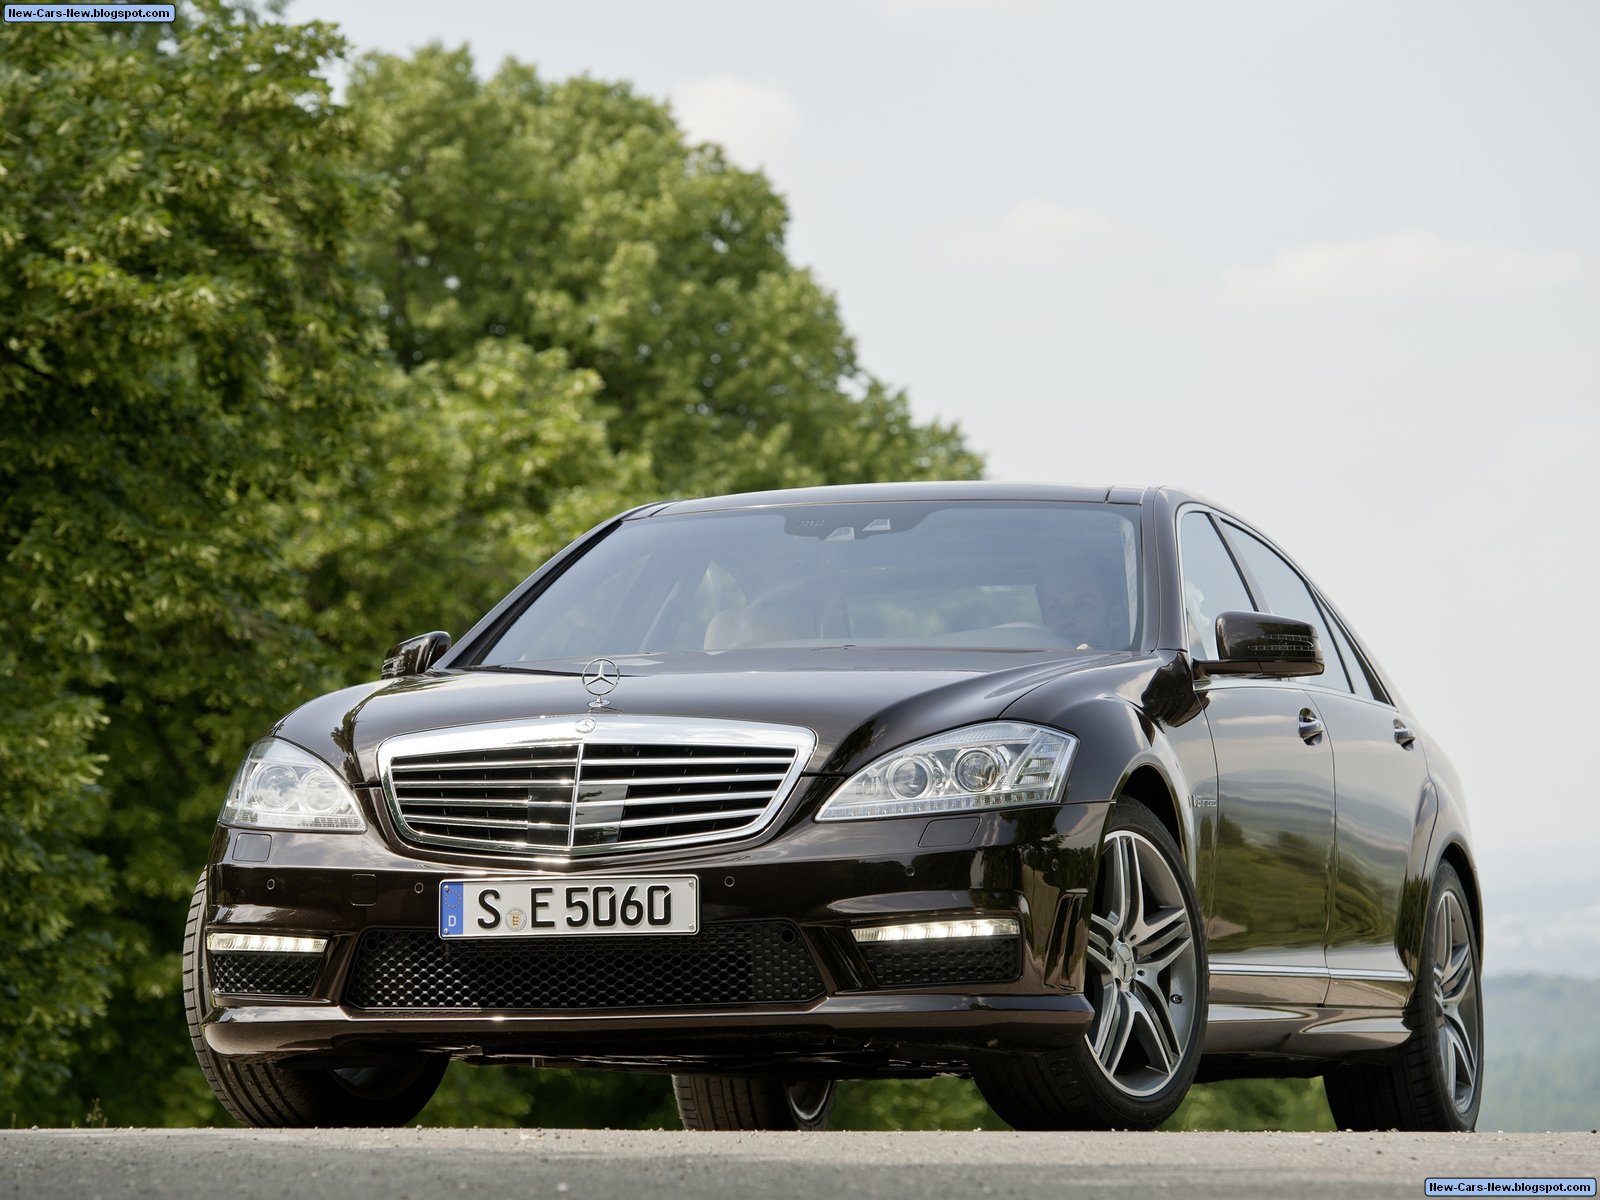 The 2011 Mercedes-Benz S63 AMG